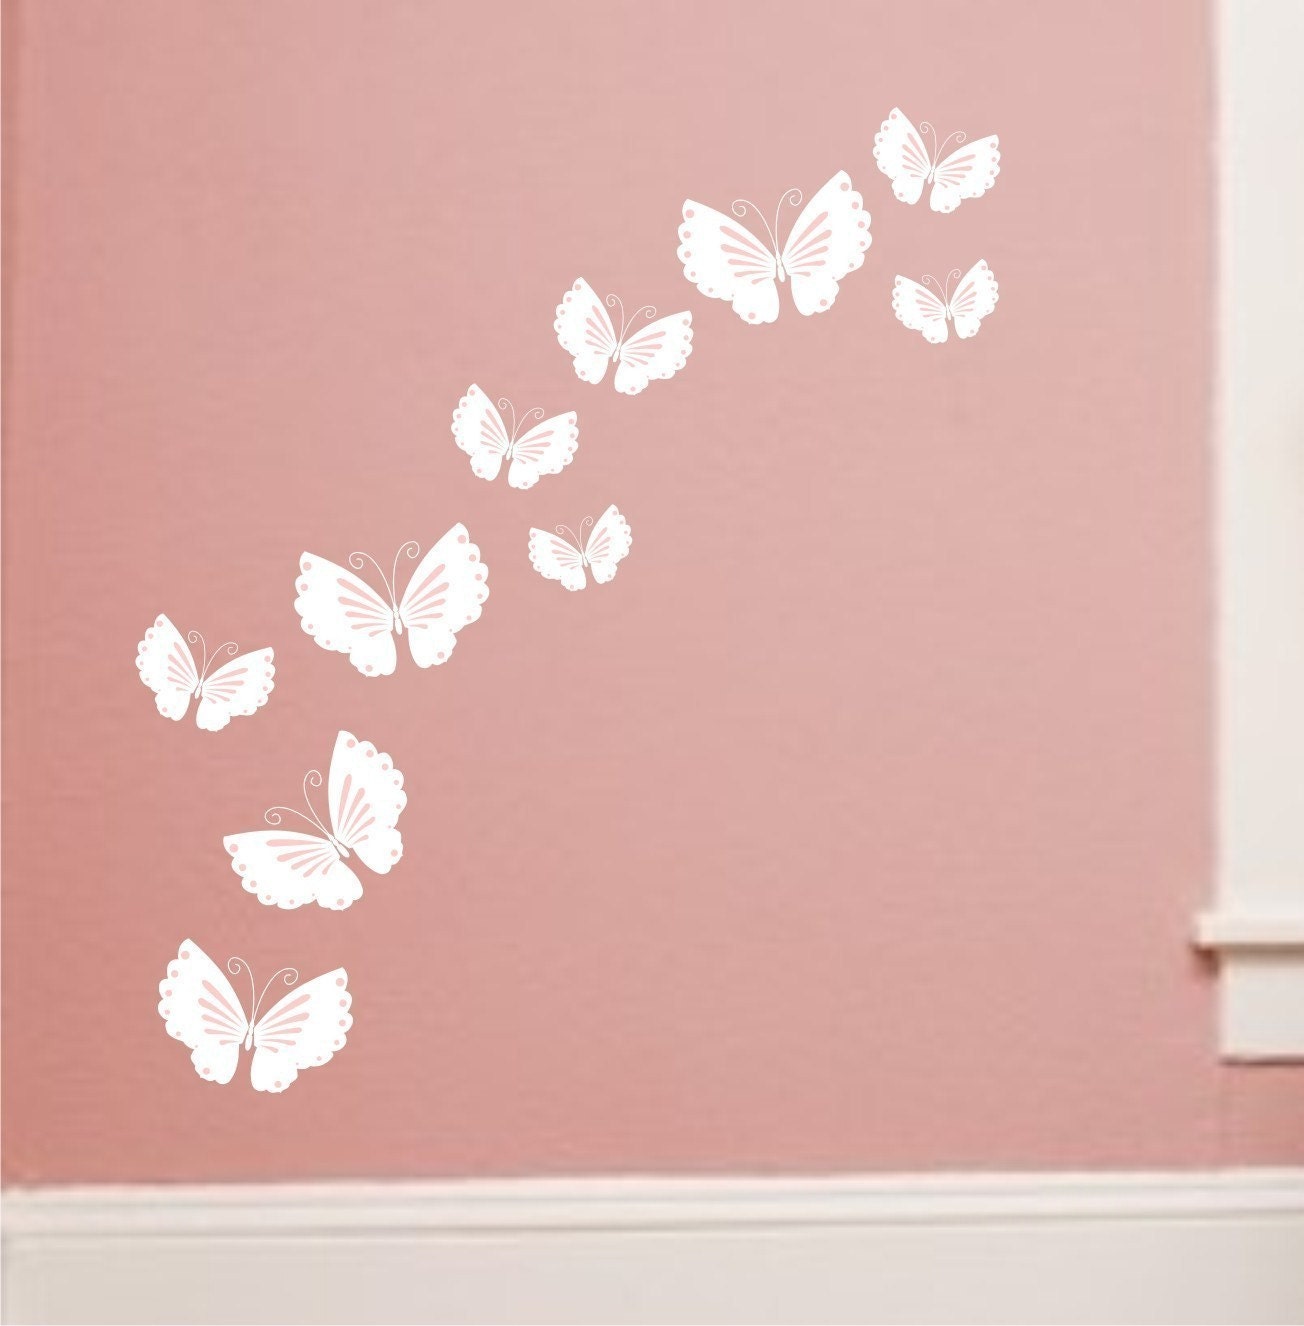 Butterfly Decal set of 12 vinyl wall decals Butterflies in many sizes